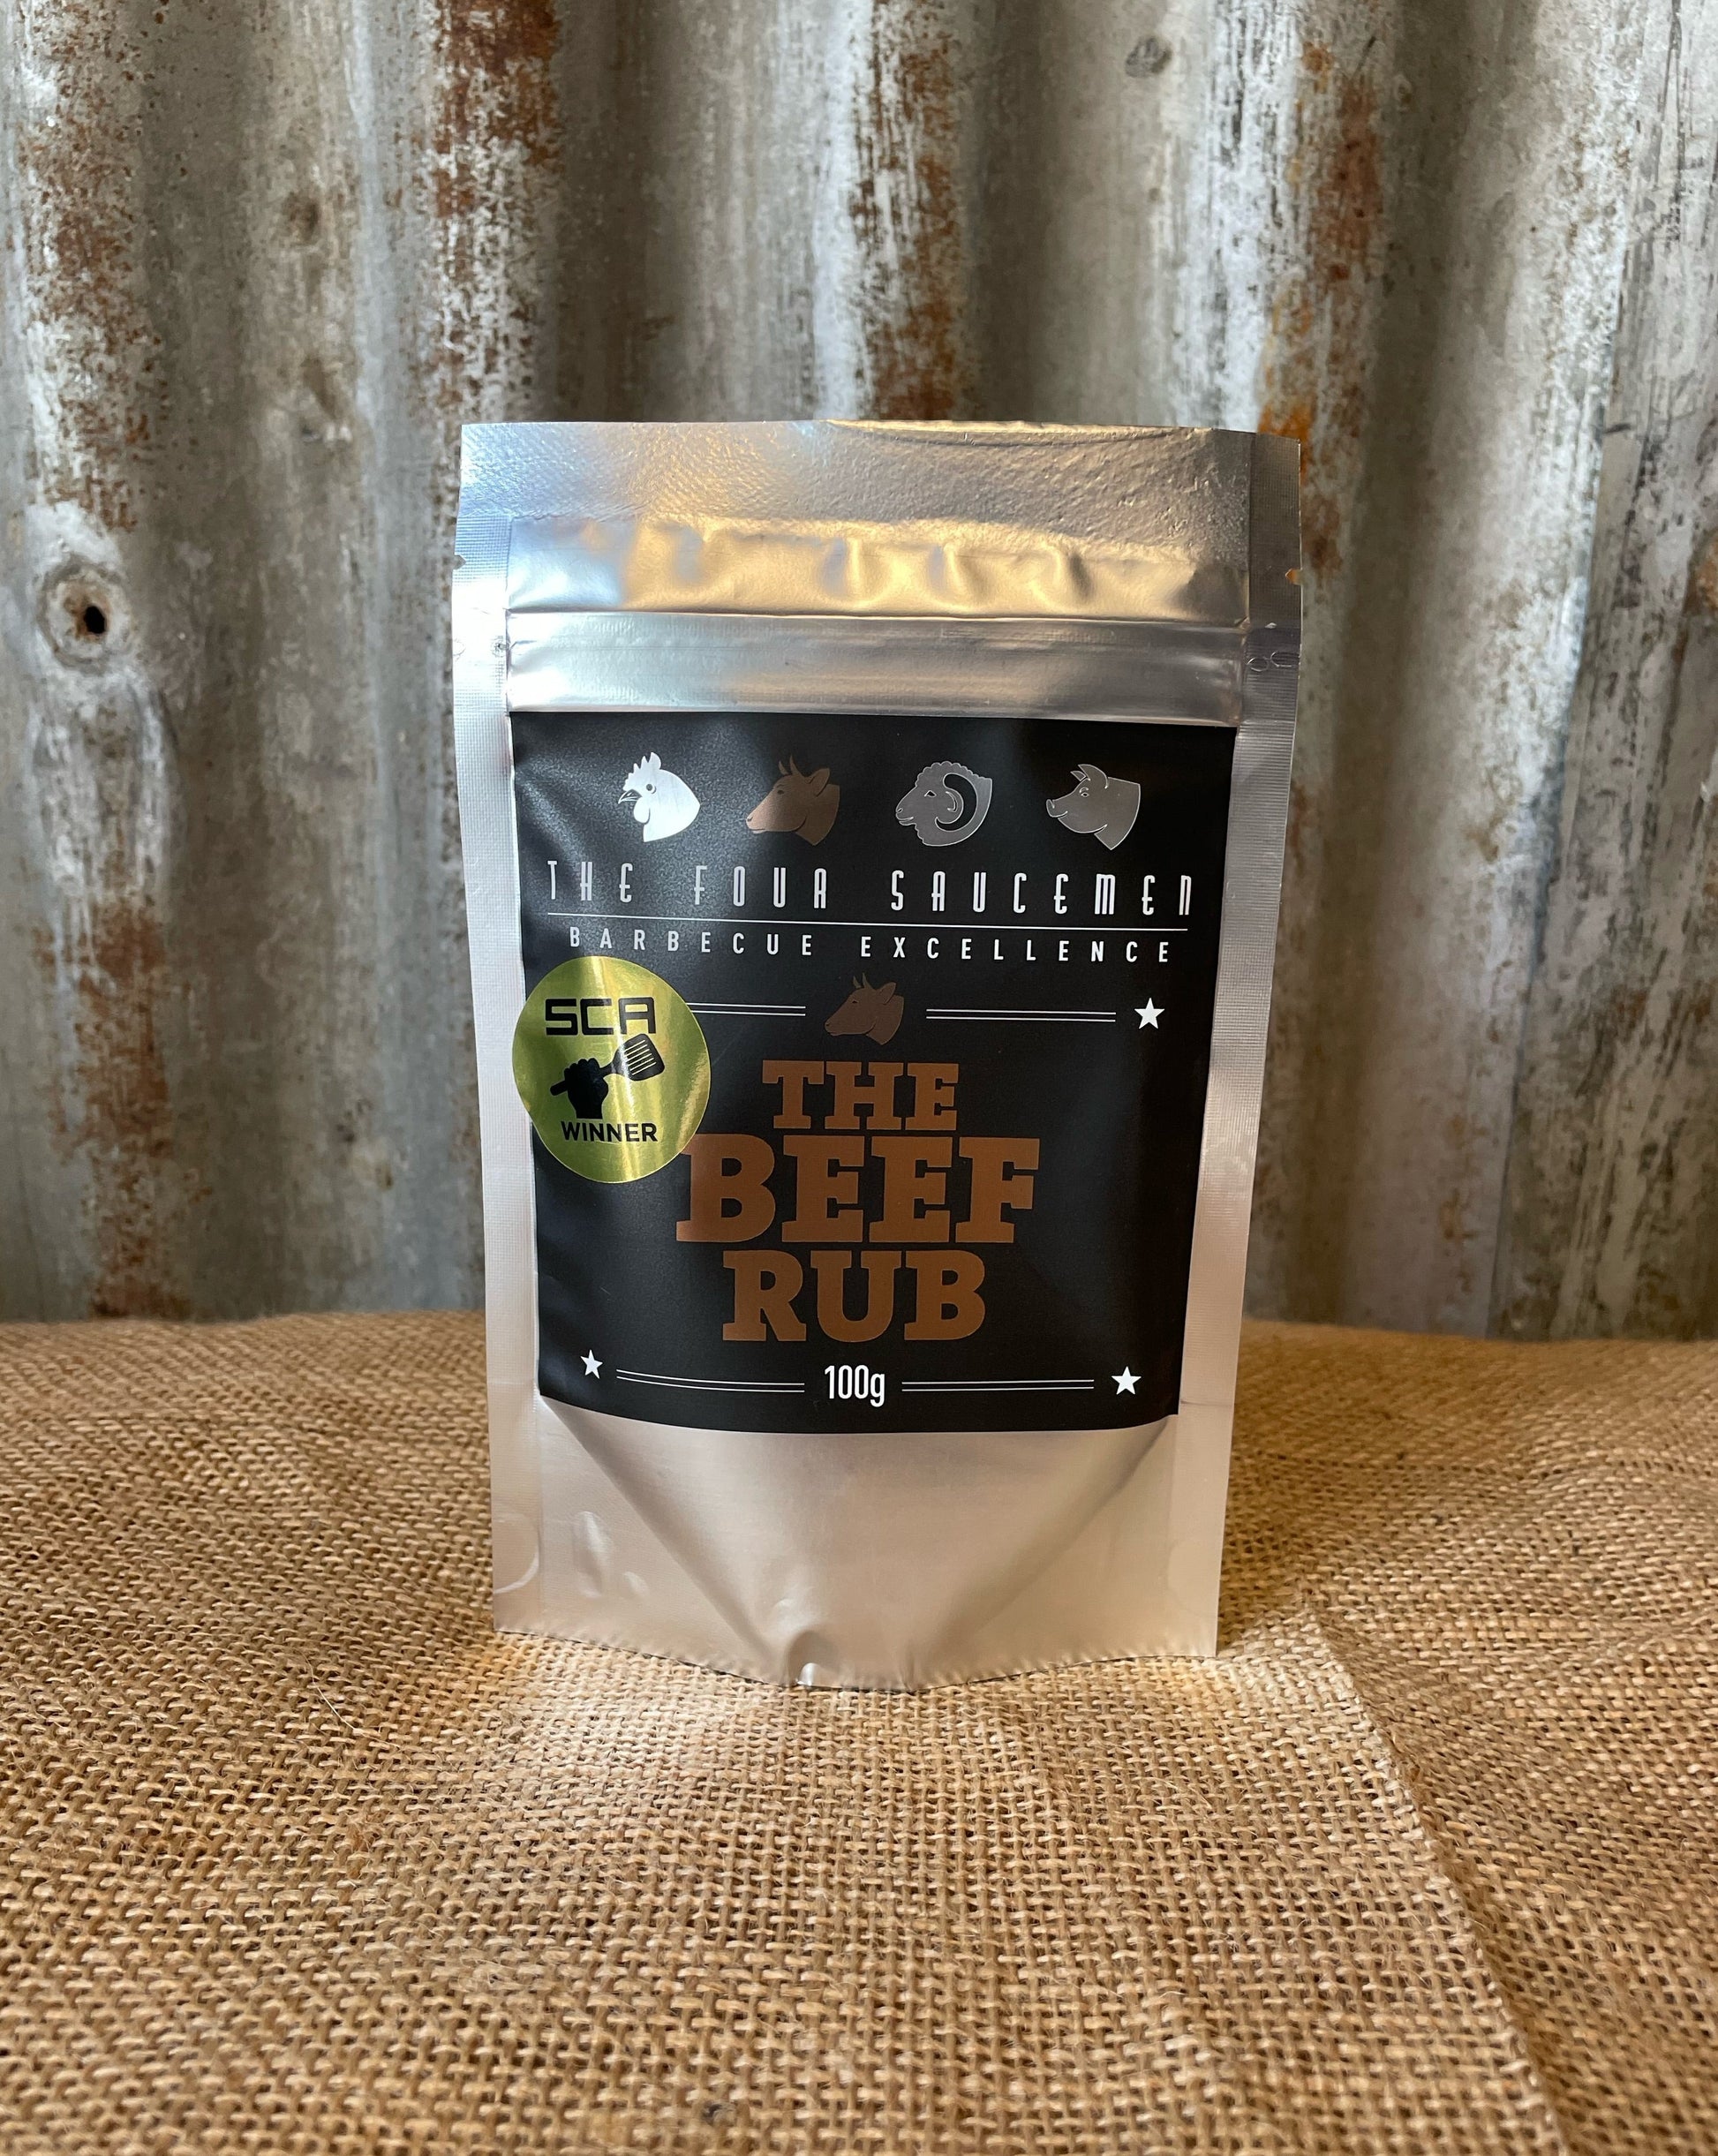 The Four Saucemen - The Beef Rub 100g